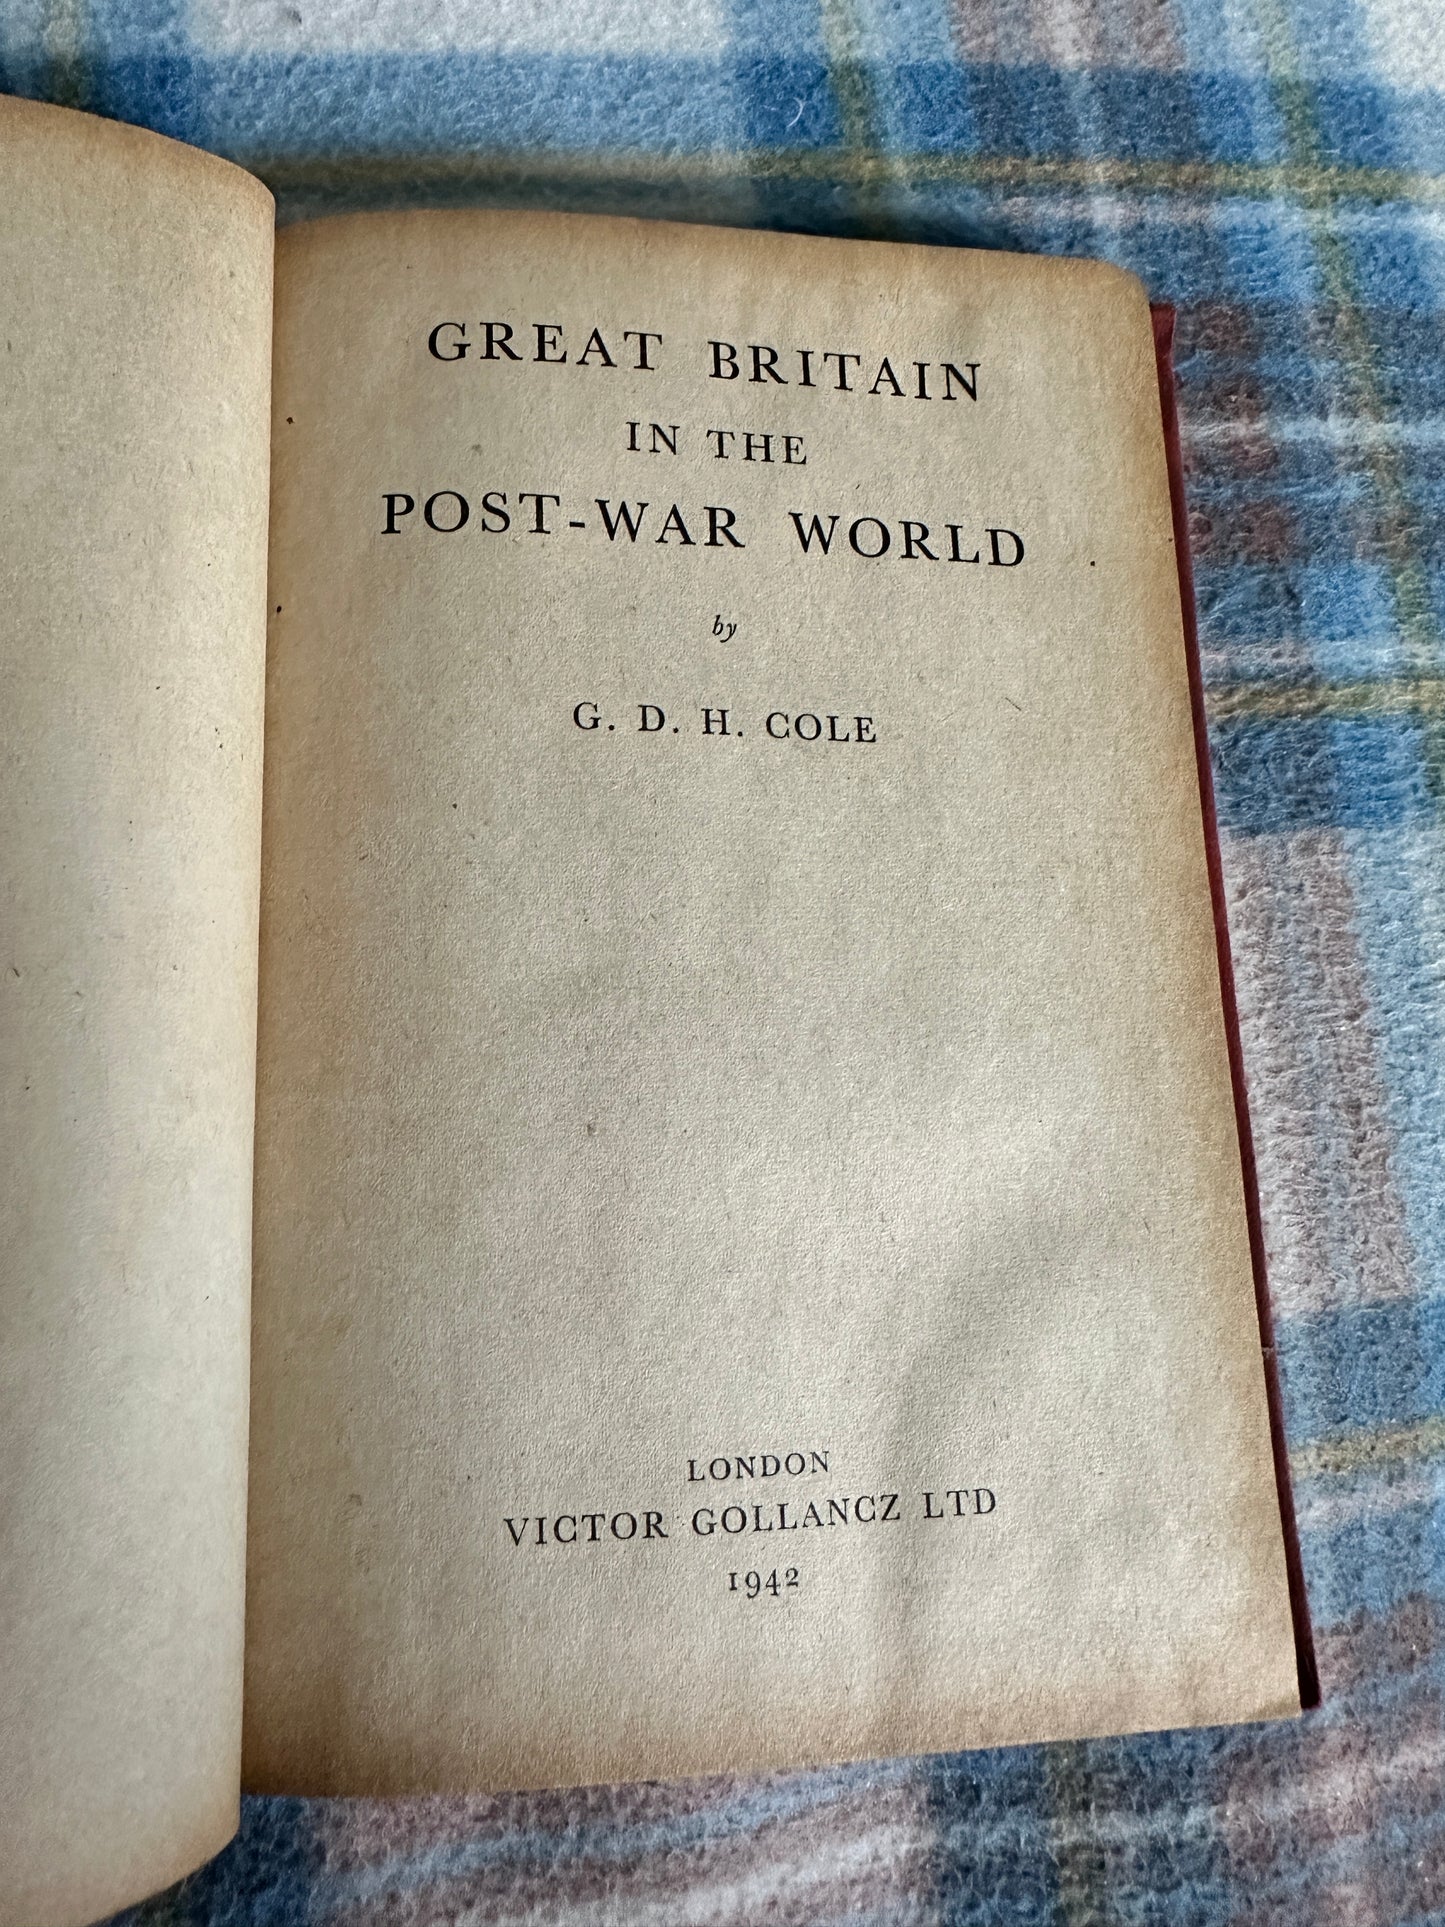 1942 Great Britain In The Post-War World - G. D. H. Cole (Left Book Club) Victor Gollancz